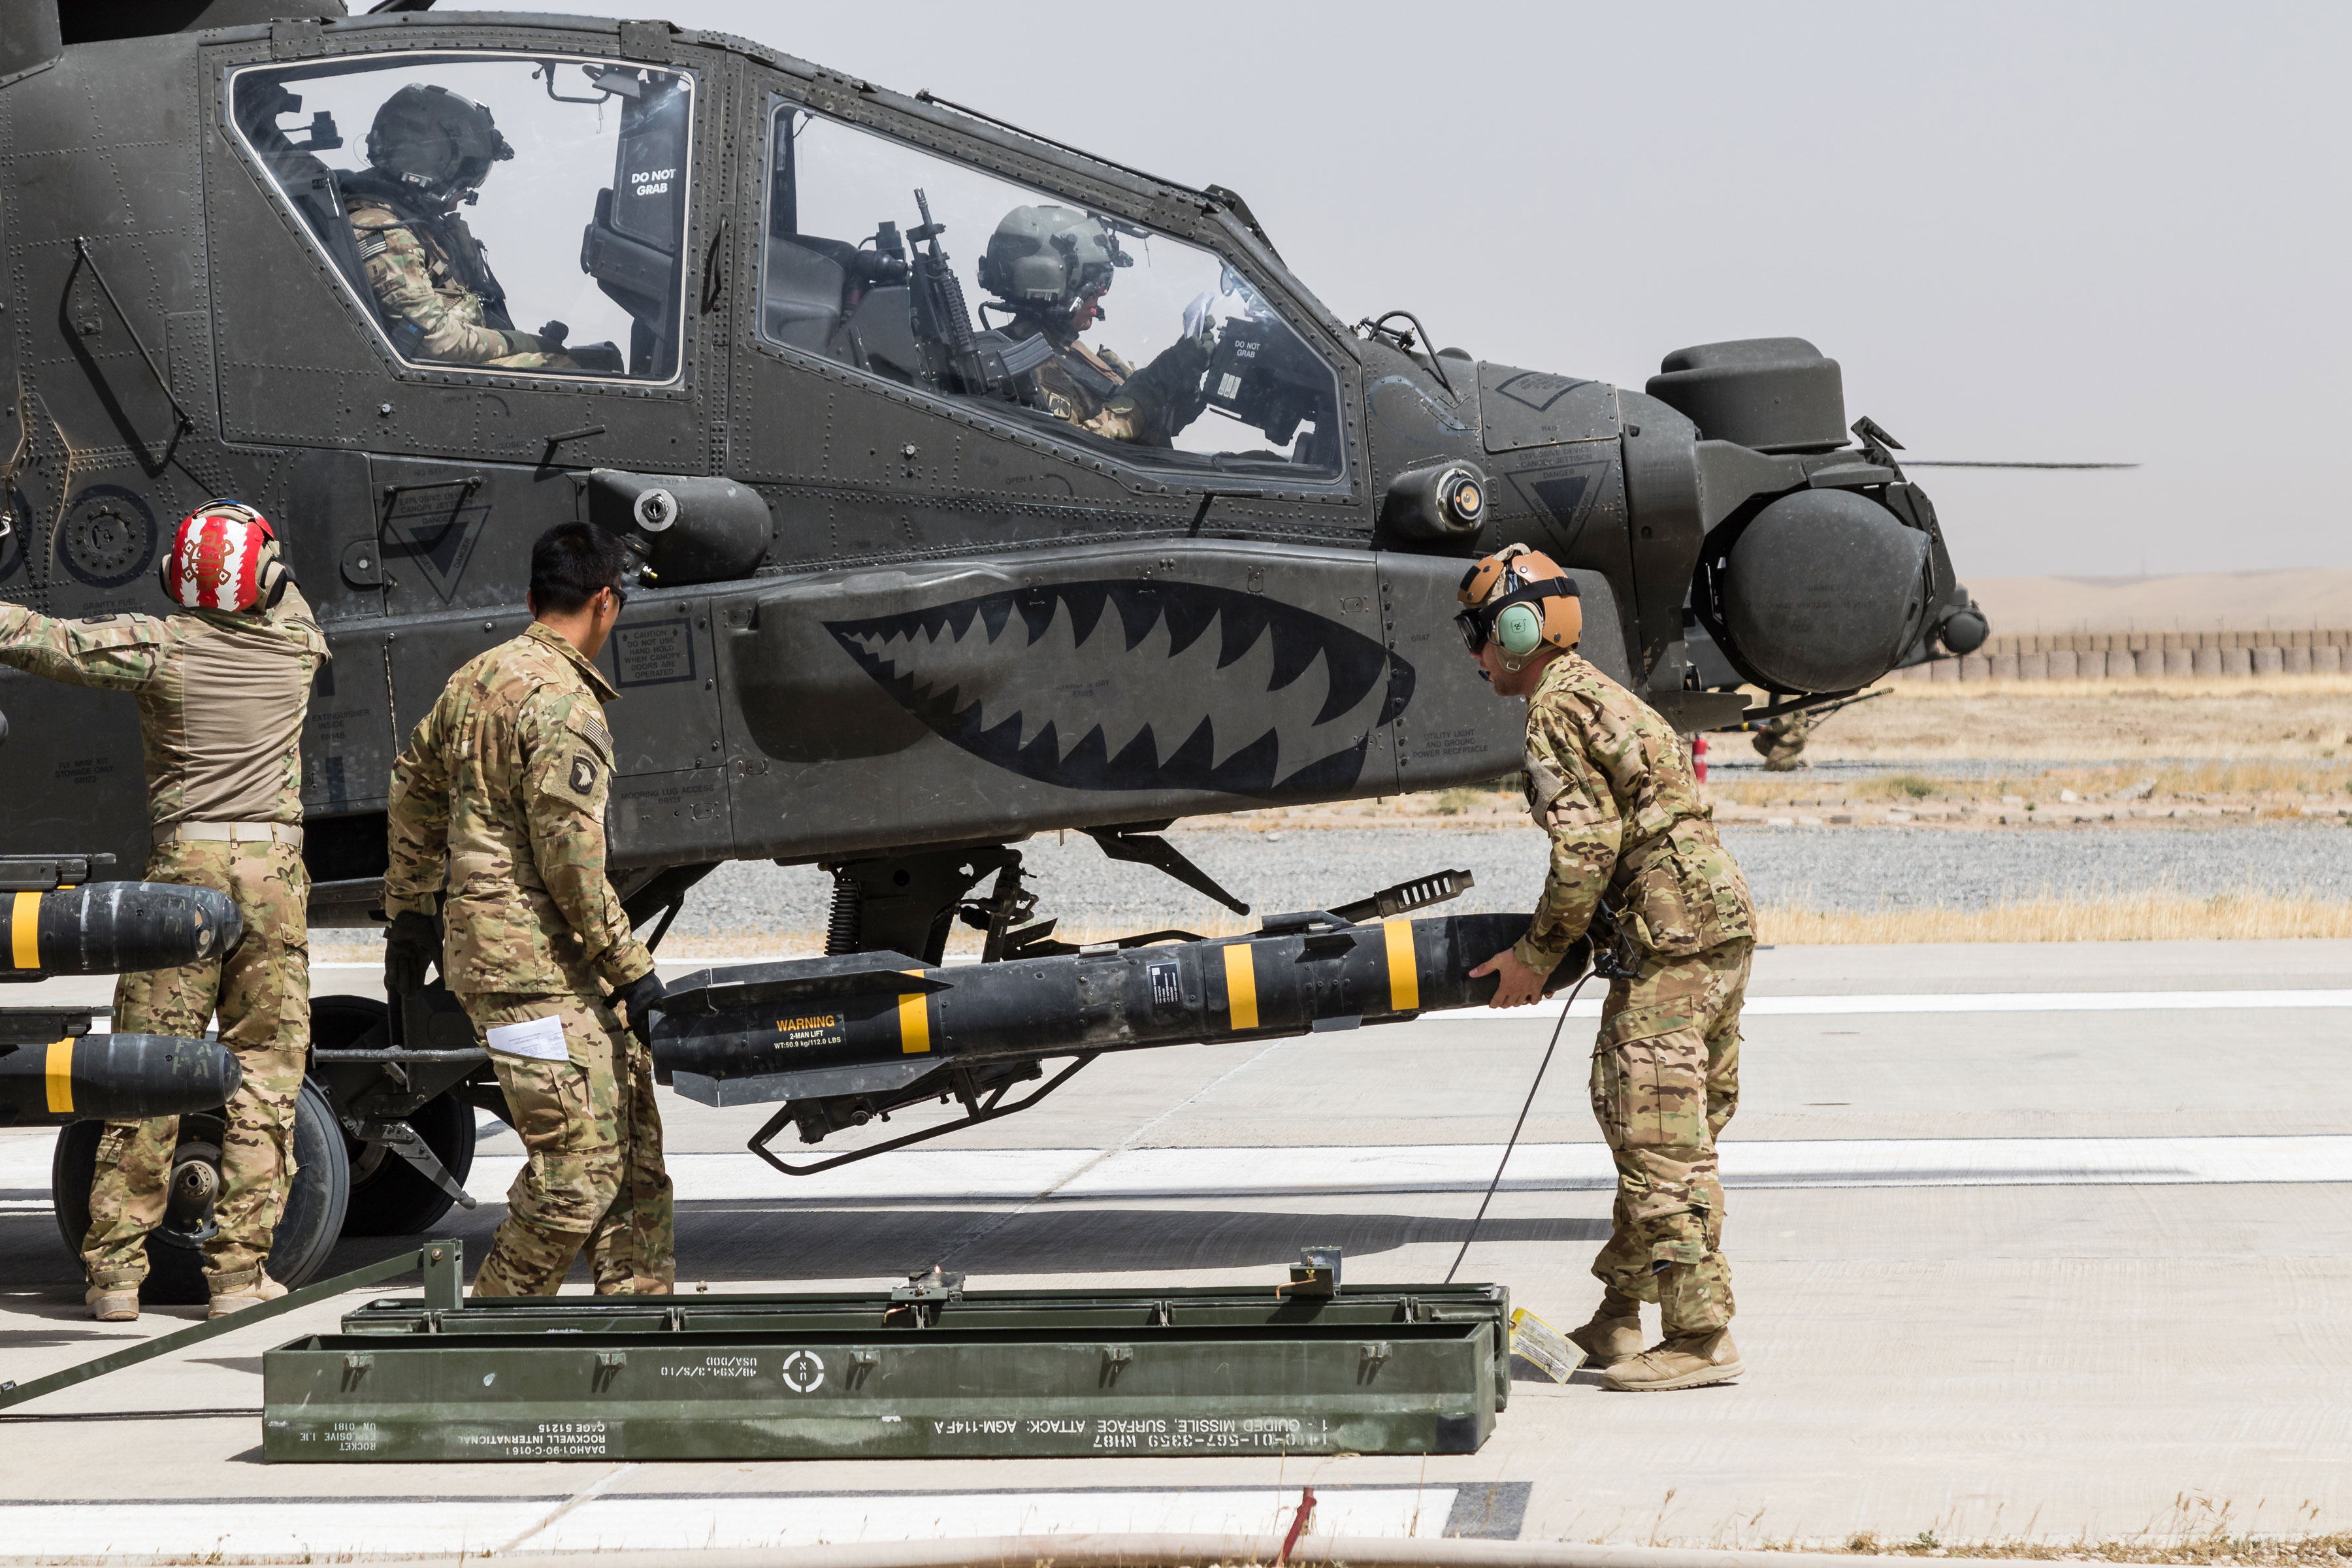 Soldiers assigned to Task Force Griffin, 16th Combat Aviation Brigade (CAB), 7th Infantry Division load an AGM-114 HELLFIRE missile on an AH-64E Apache helicopter in Kunduz, Afghanistan, in May. This support for U.S. Forces Afghanistan is possible, in turn, because of long-standing, ongoing relationships between government and the private sector in research and development. Cultivating and maintaining such ties helps Army acquisition ensure that its development and acquisition strategies will produce the best, most up-to-date and effective equipment. (U.S. Army photo by Capt. Brian Harris, 16th CAB)